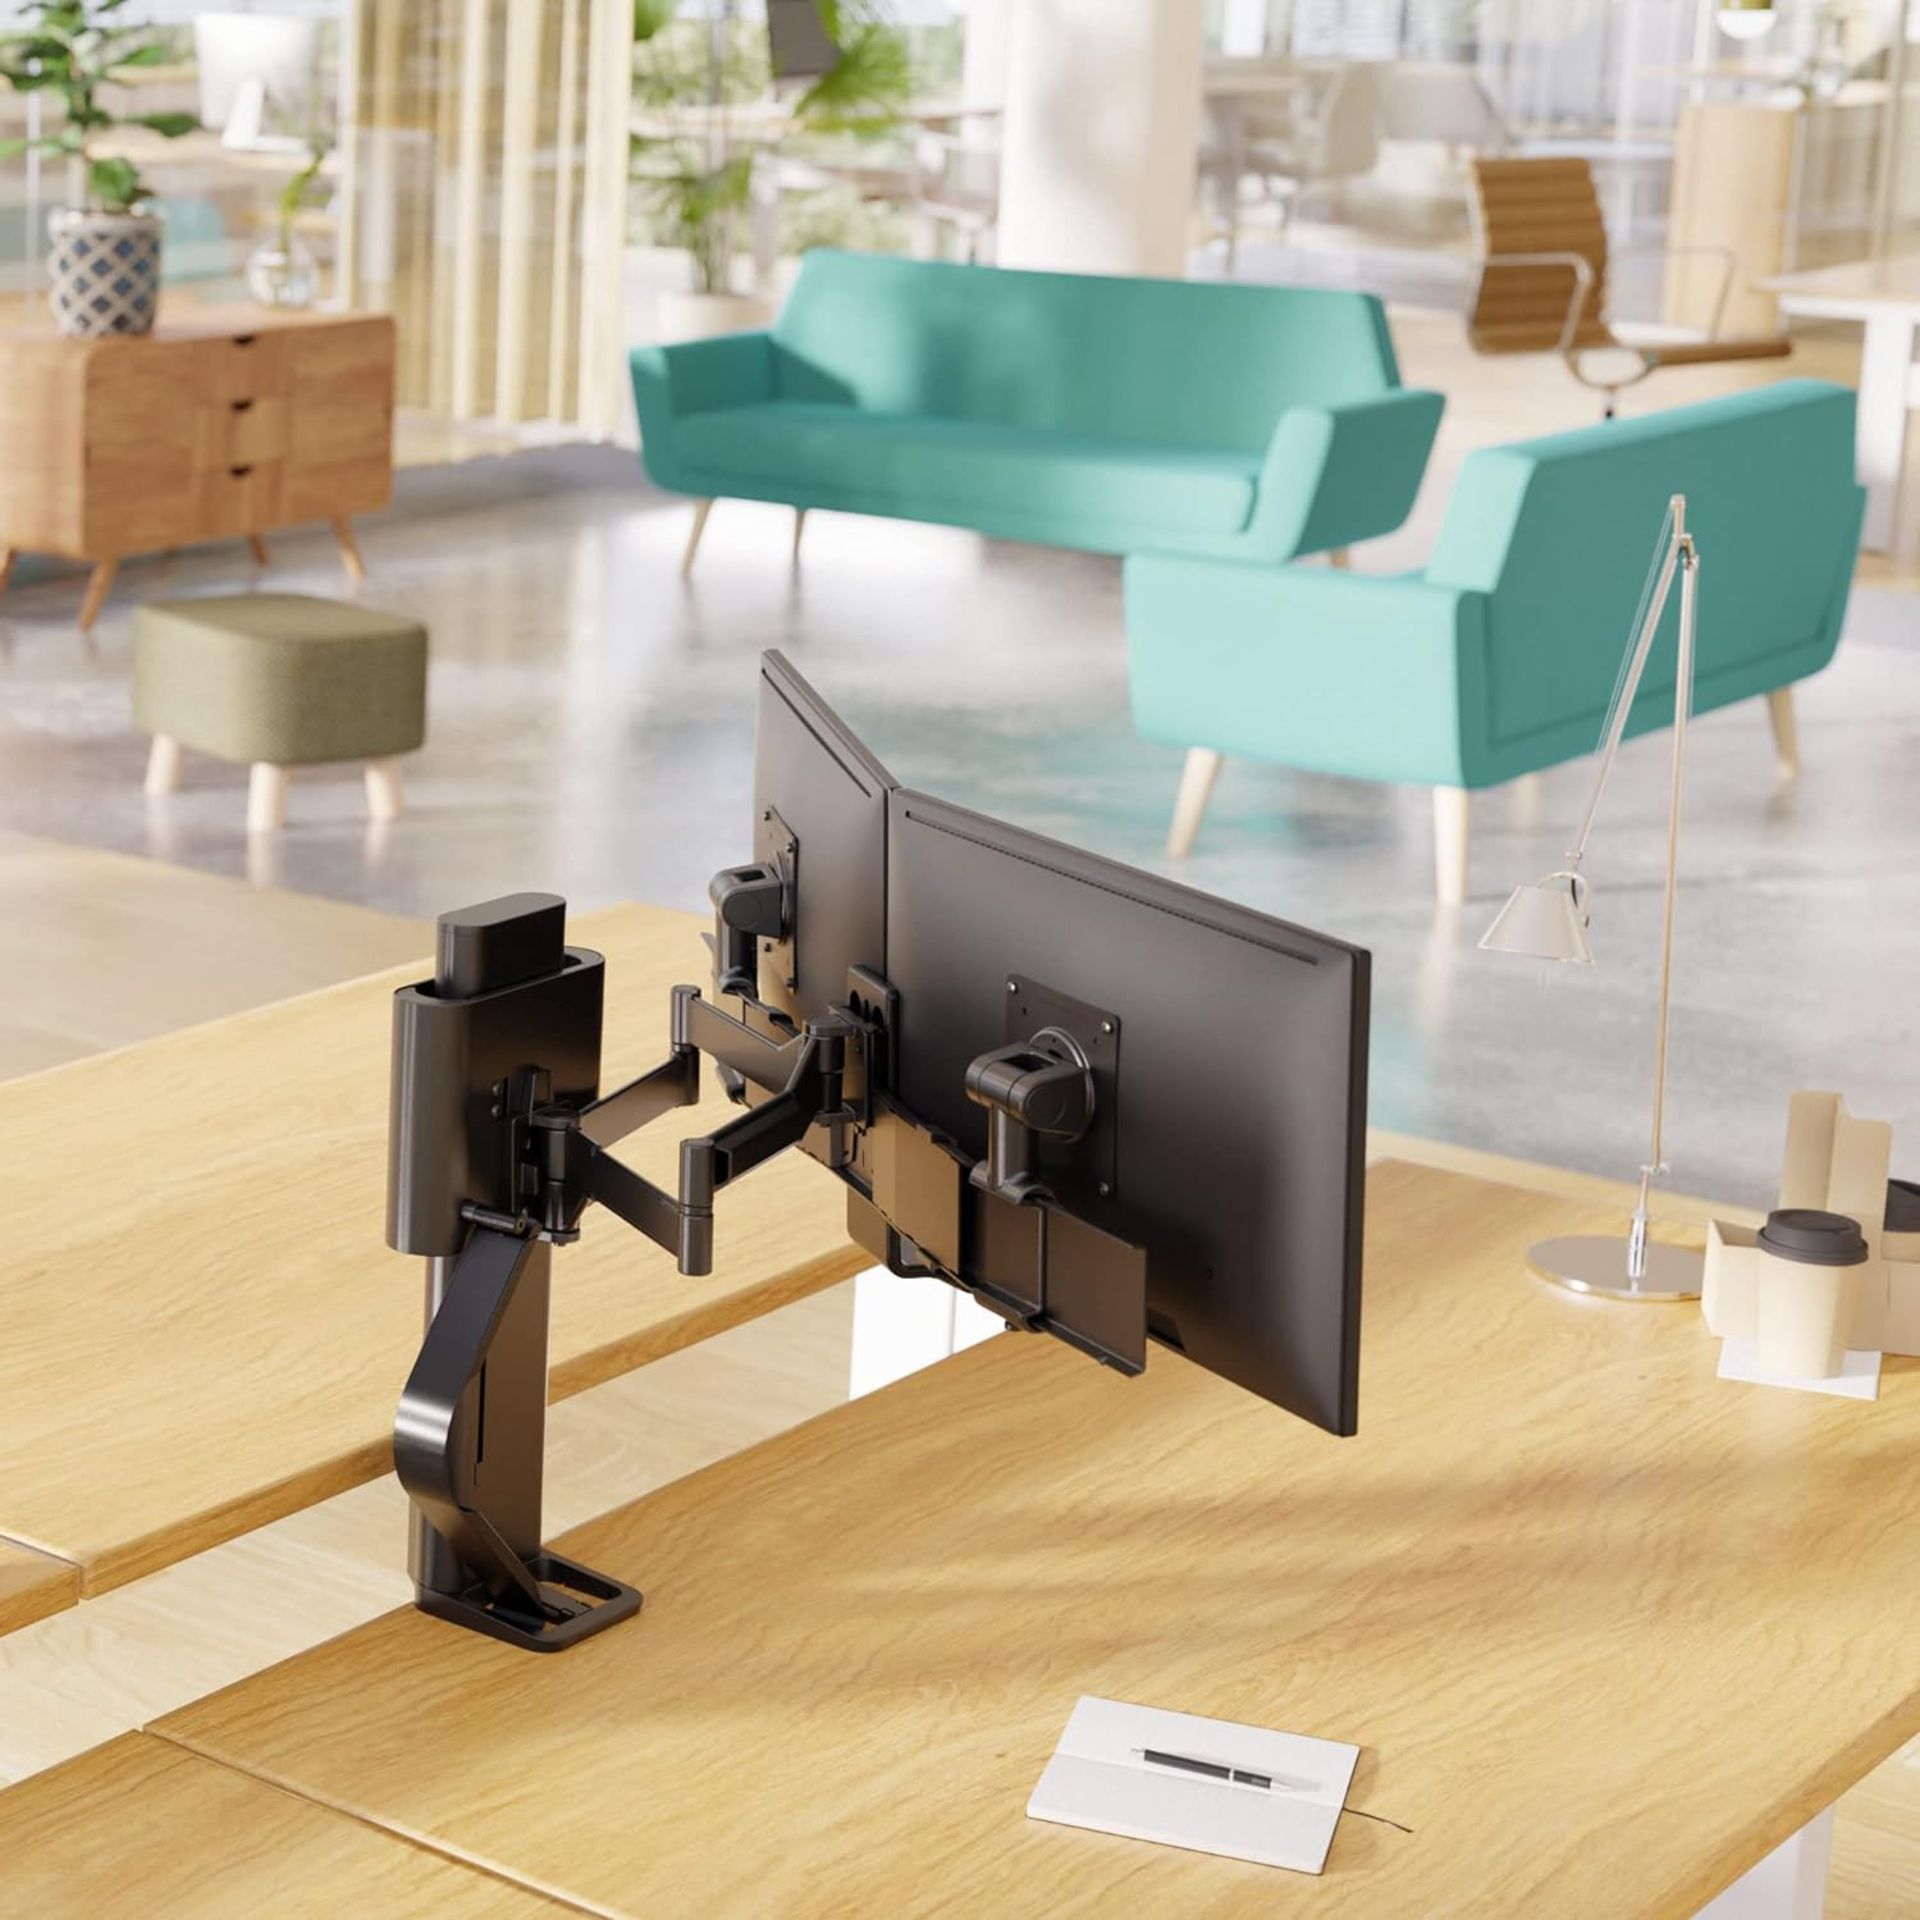 NEW & BOXED ERGOTRON Trace Dual Monitor Arm, VESA Desk Mount. RRP £417. (PCK5). for 2 Monitors Up to - Image 4 of 8